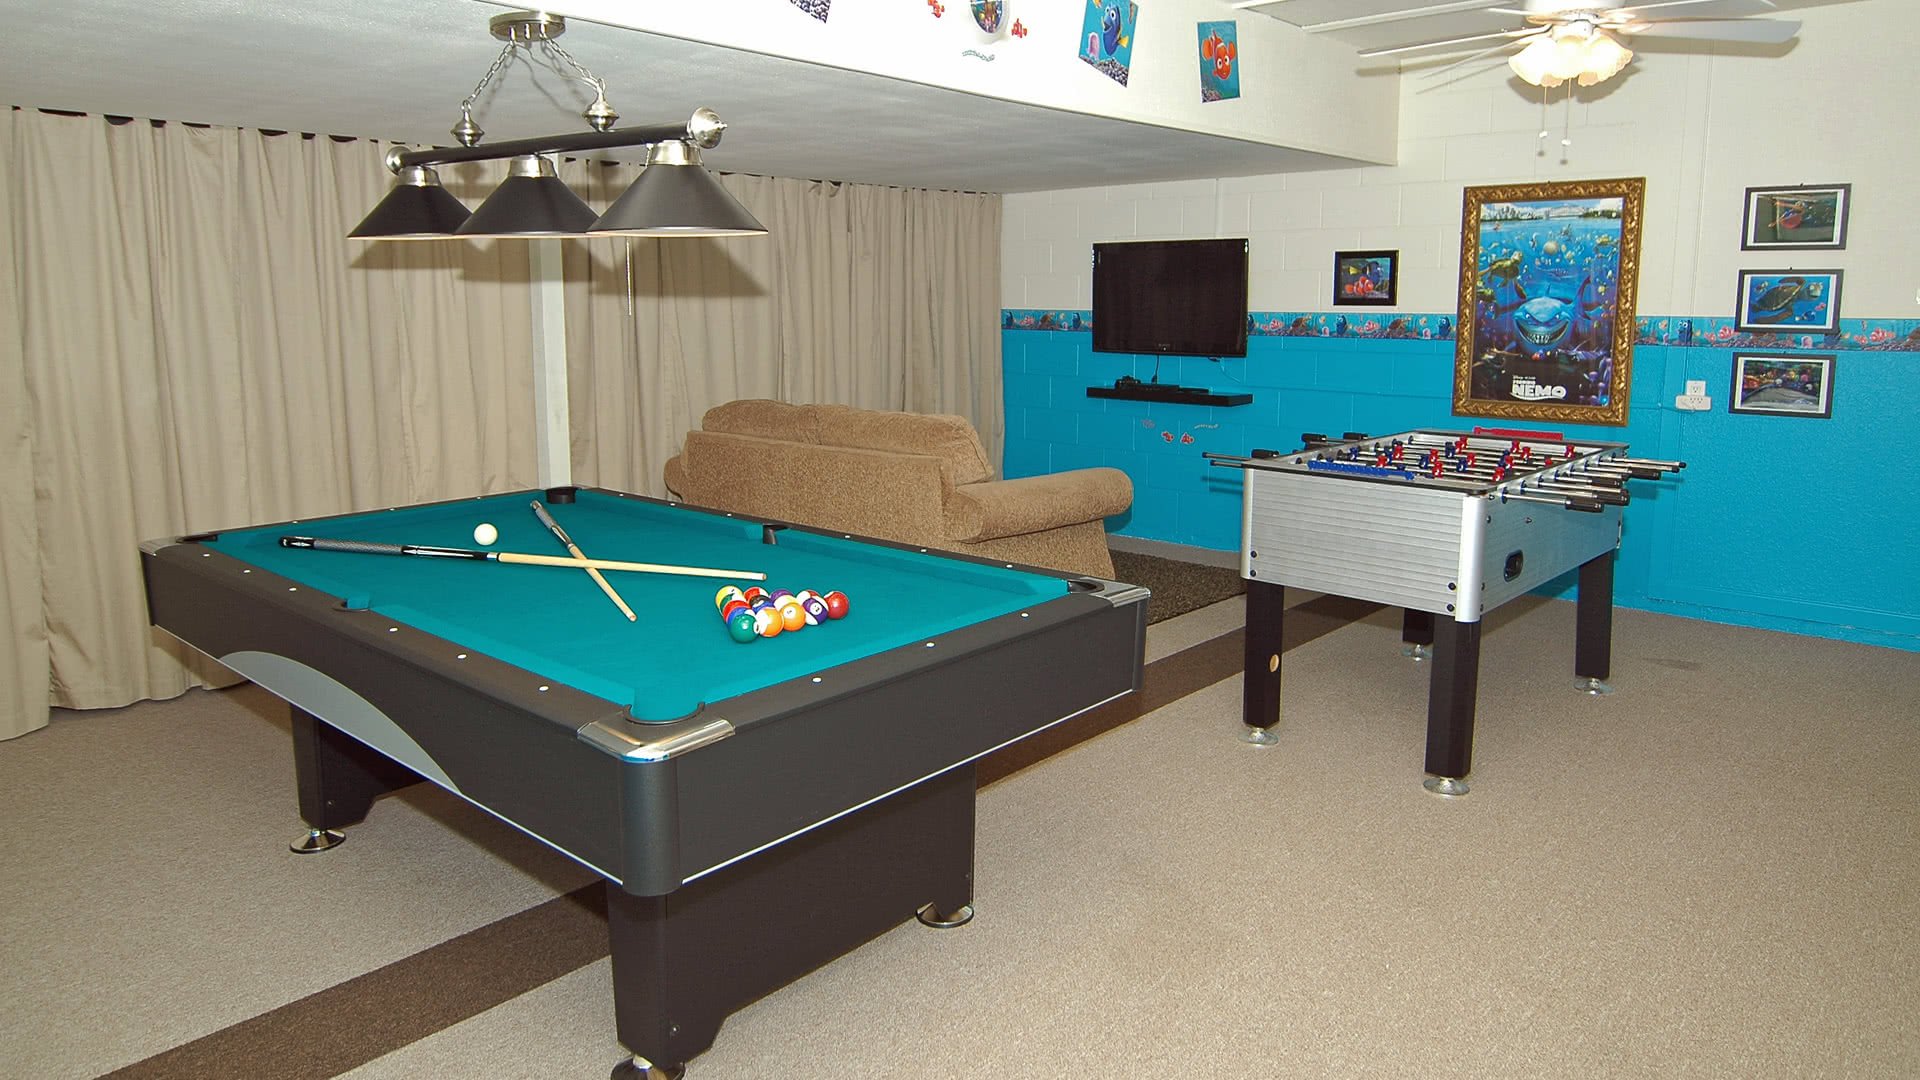 Game Room
43